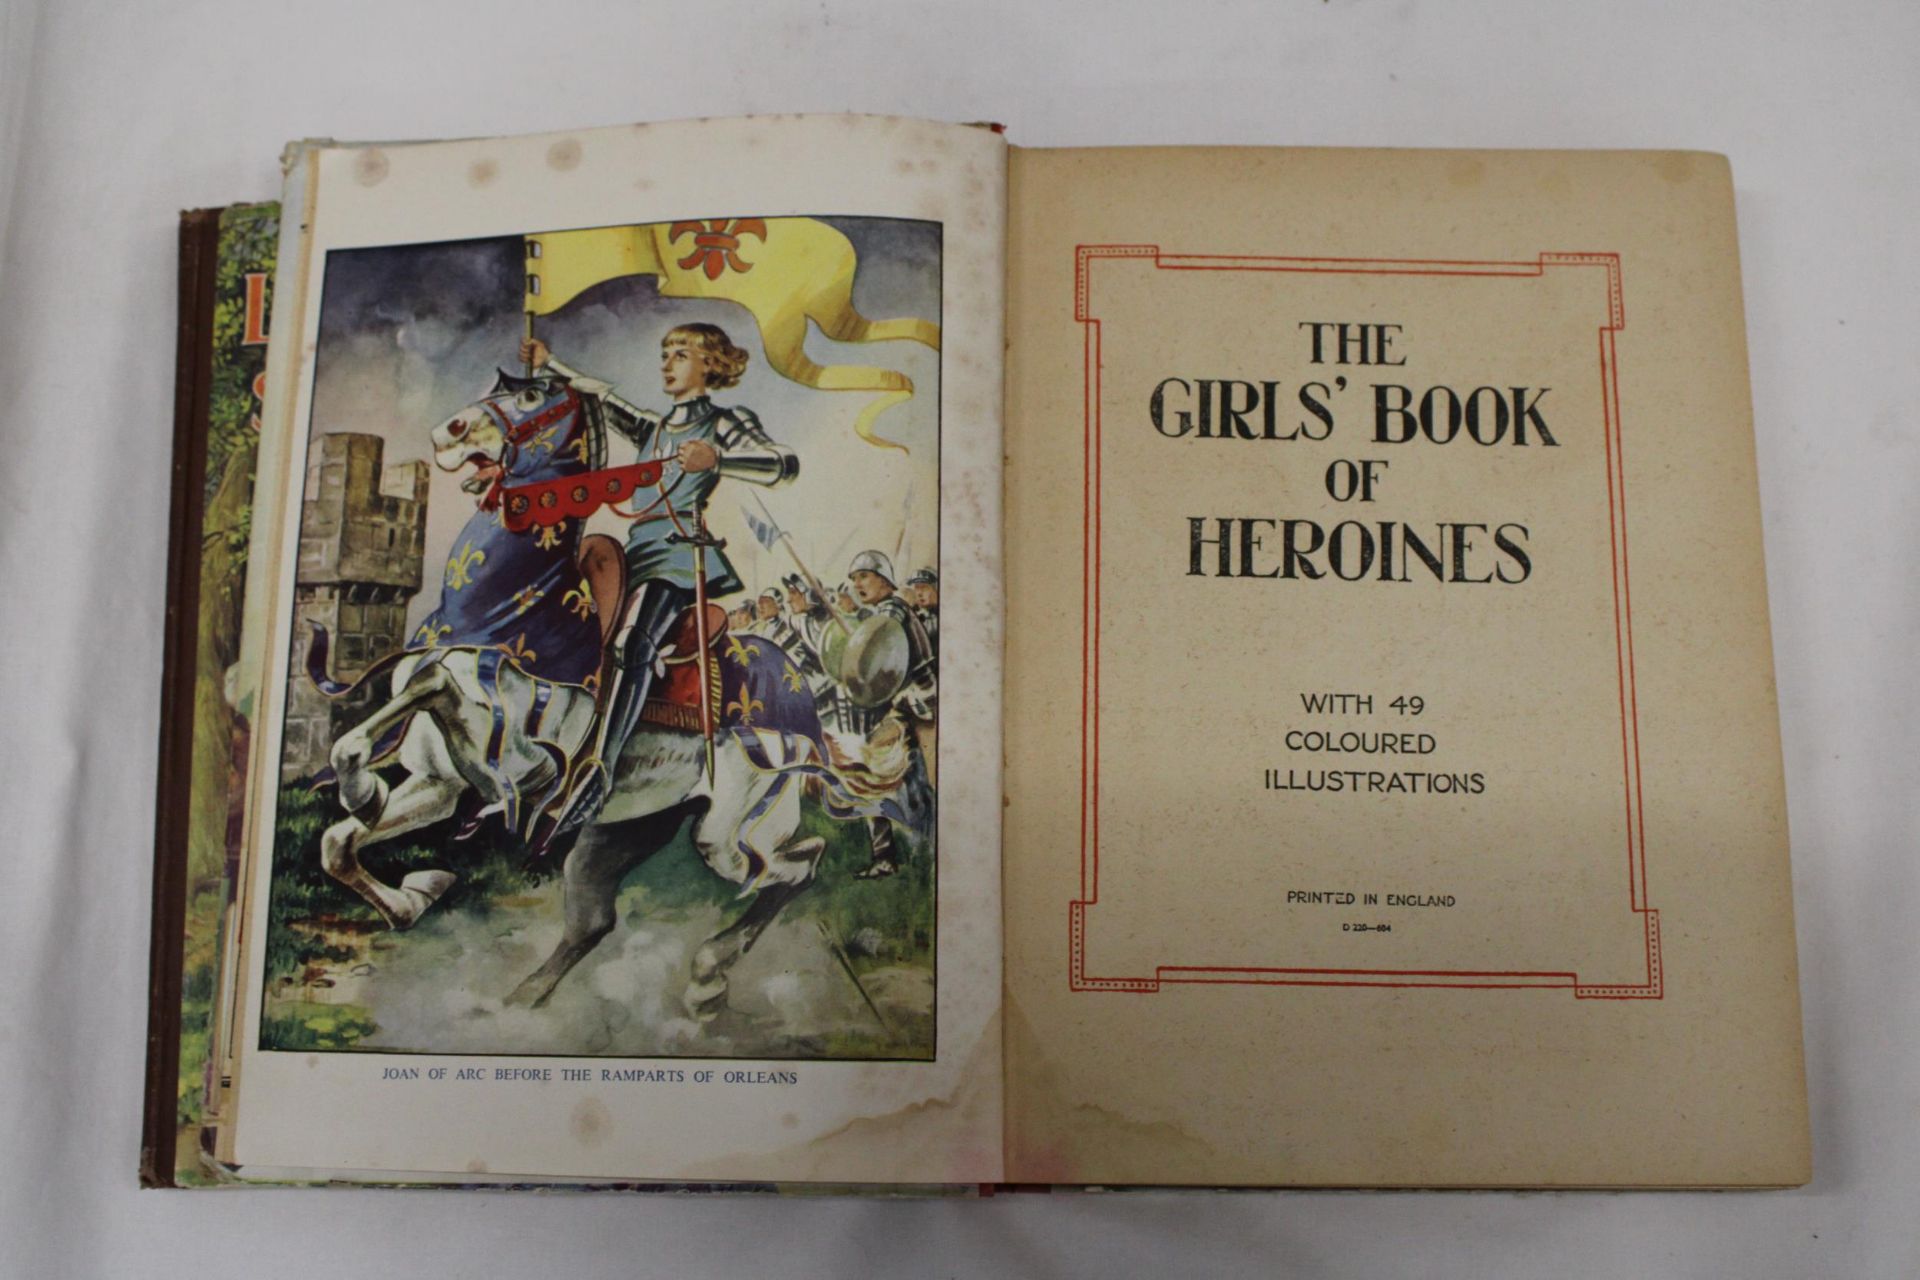 TWO VINTAGE HARDBACK CHILDREN'S BOOKS, 'THE GIRL'S BOOK OF HEROINES' AND 'LAMB'S TALES FROM - Image 7 of 8